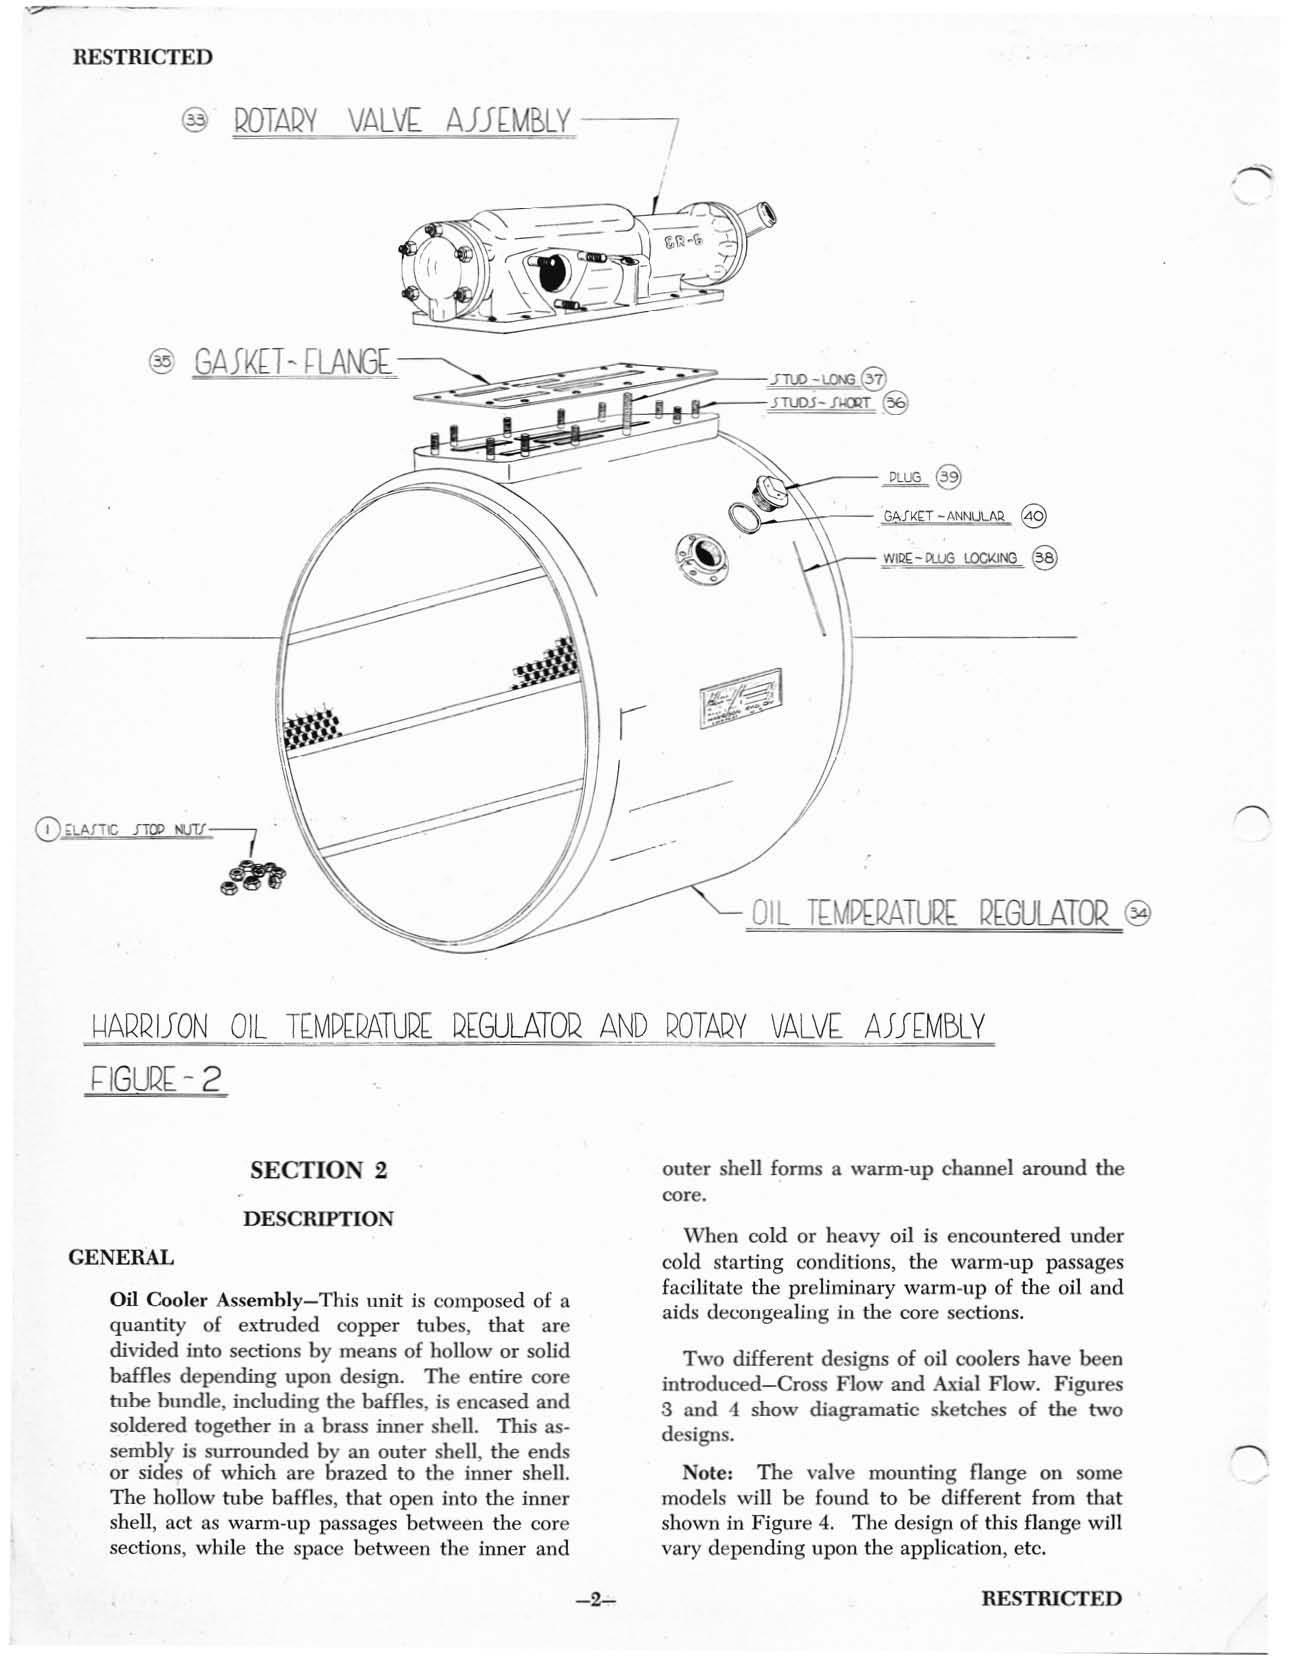 Sample page 5 from AirCorps Library document: Aviation Service Manual for Harrison Oil Coolers